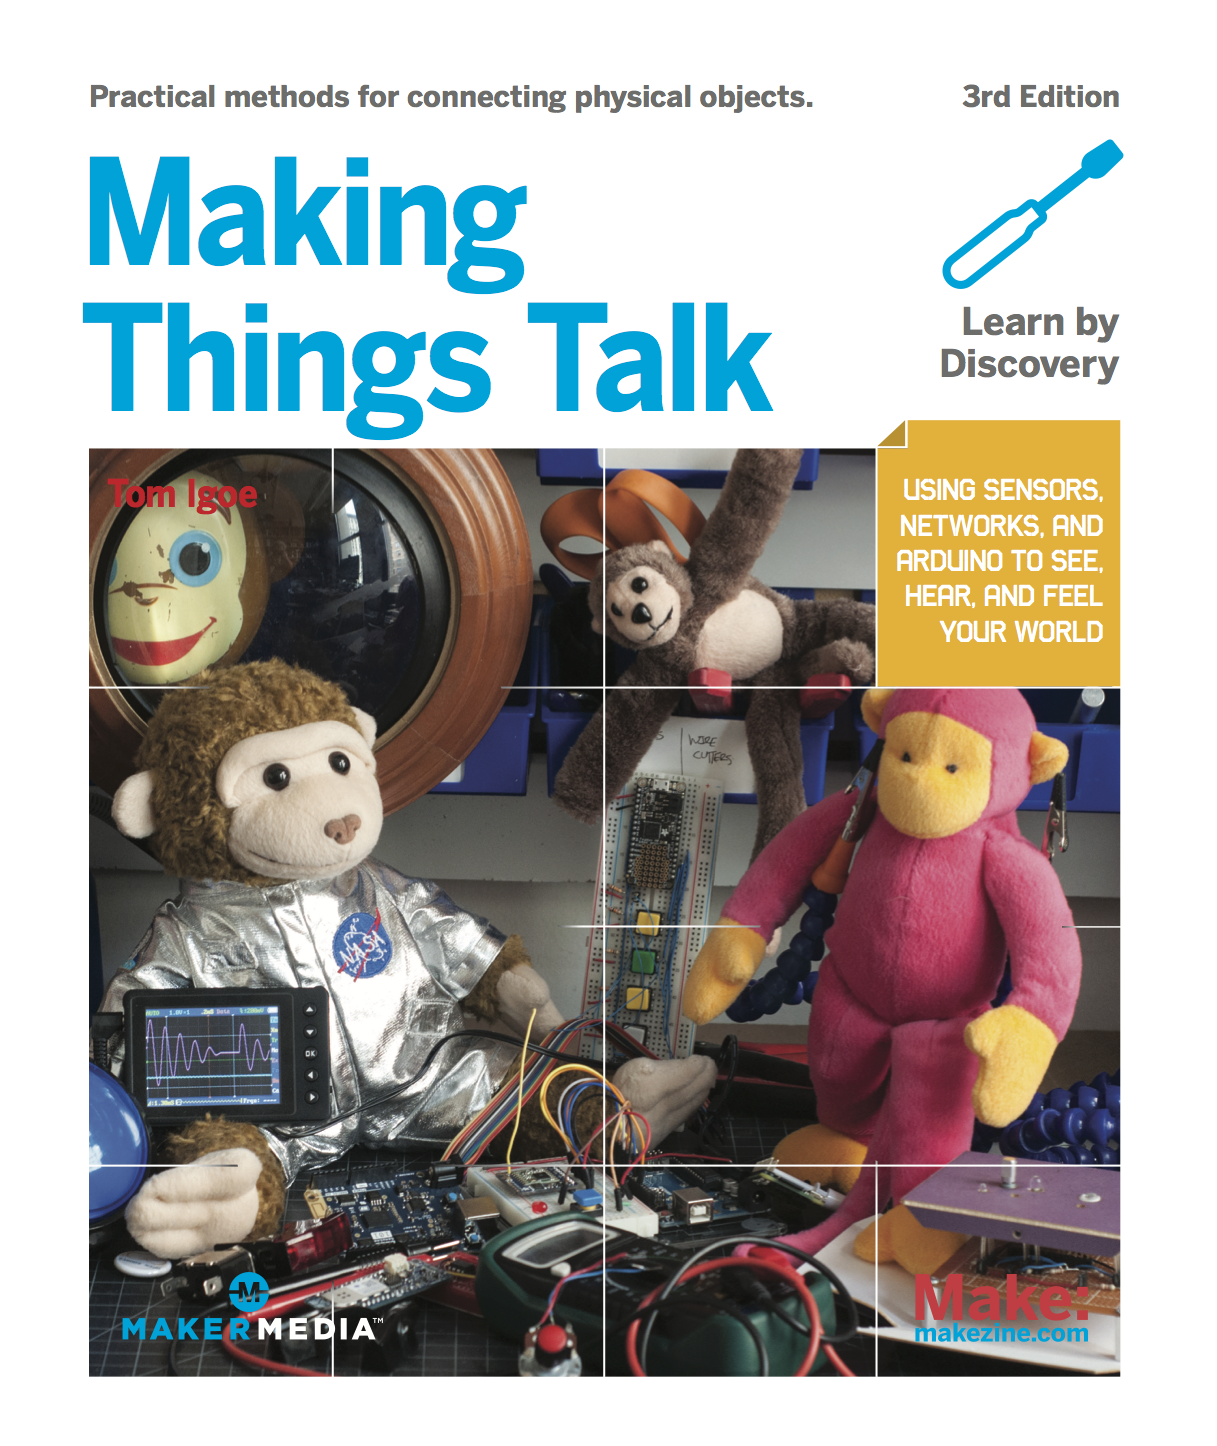 Making Things Talk -- Once Again!